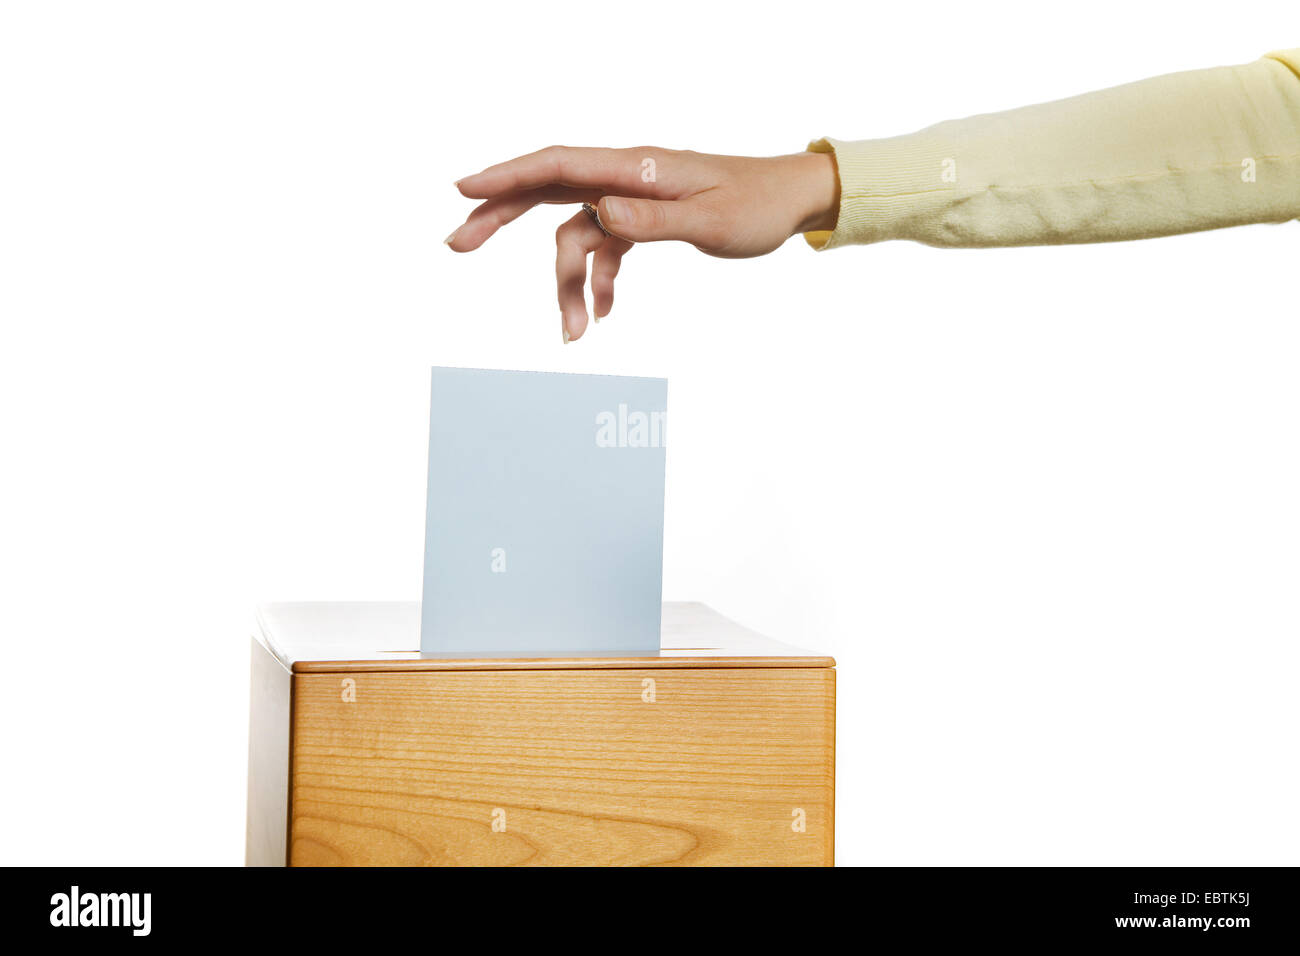 woman gives her vote at an election, a ballot box in polling station Stock Photo